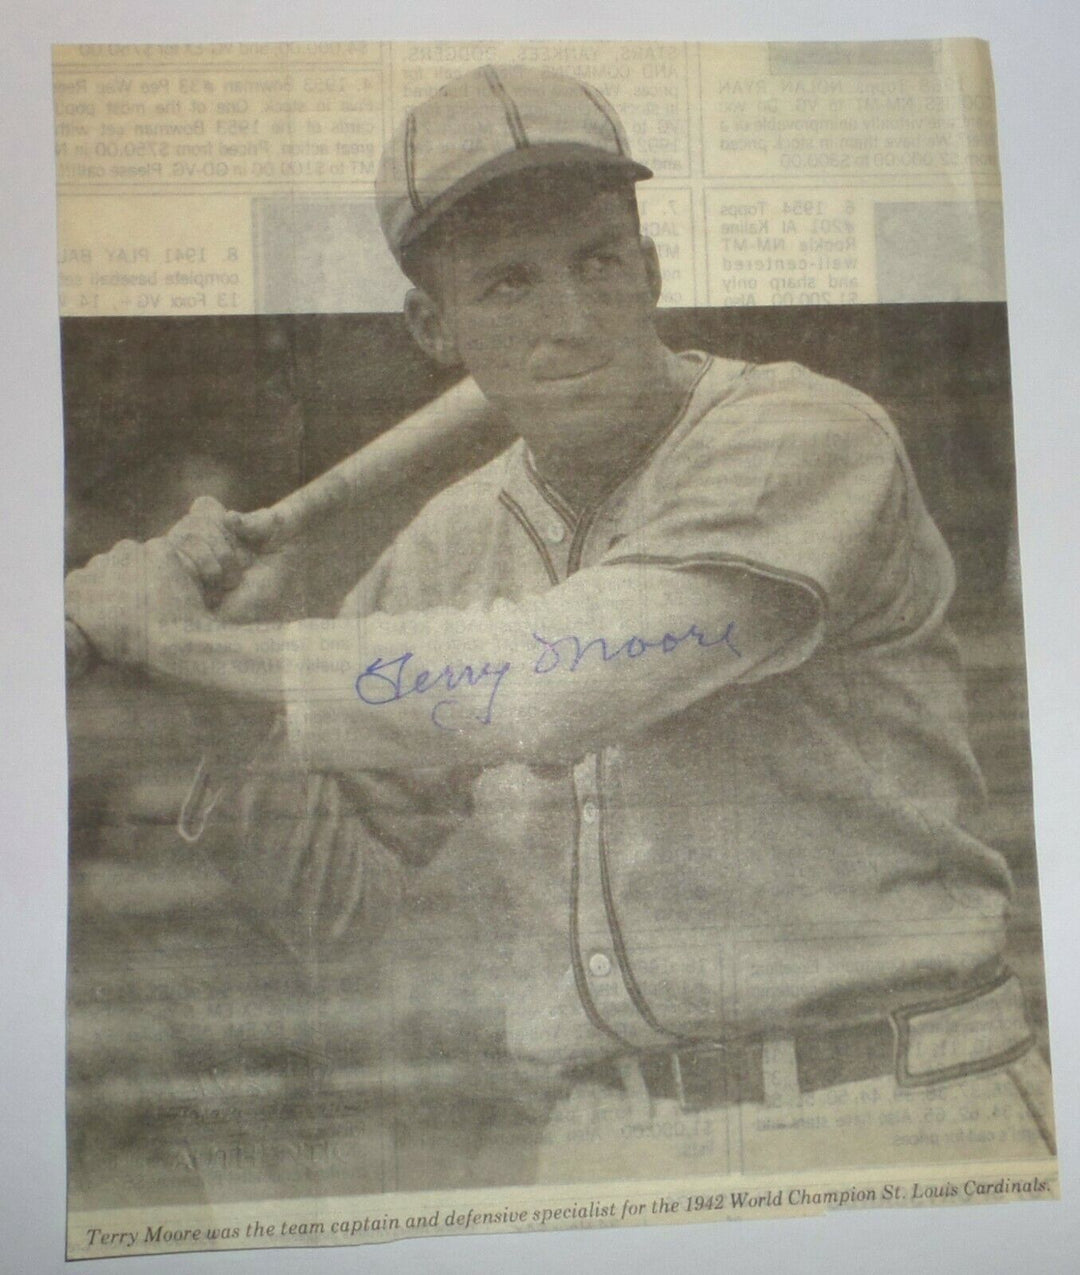 TERRY MOORE SIGNED 7" x 9" NEWSPAPER CUT 1942 ST LOUIS CARDINALS WORLD CHAMPION Image 1